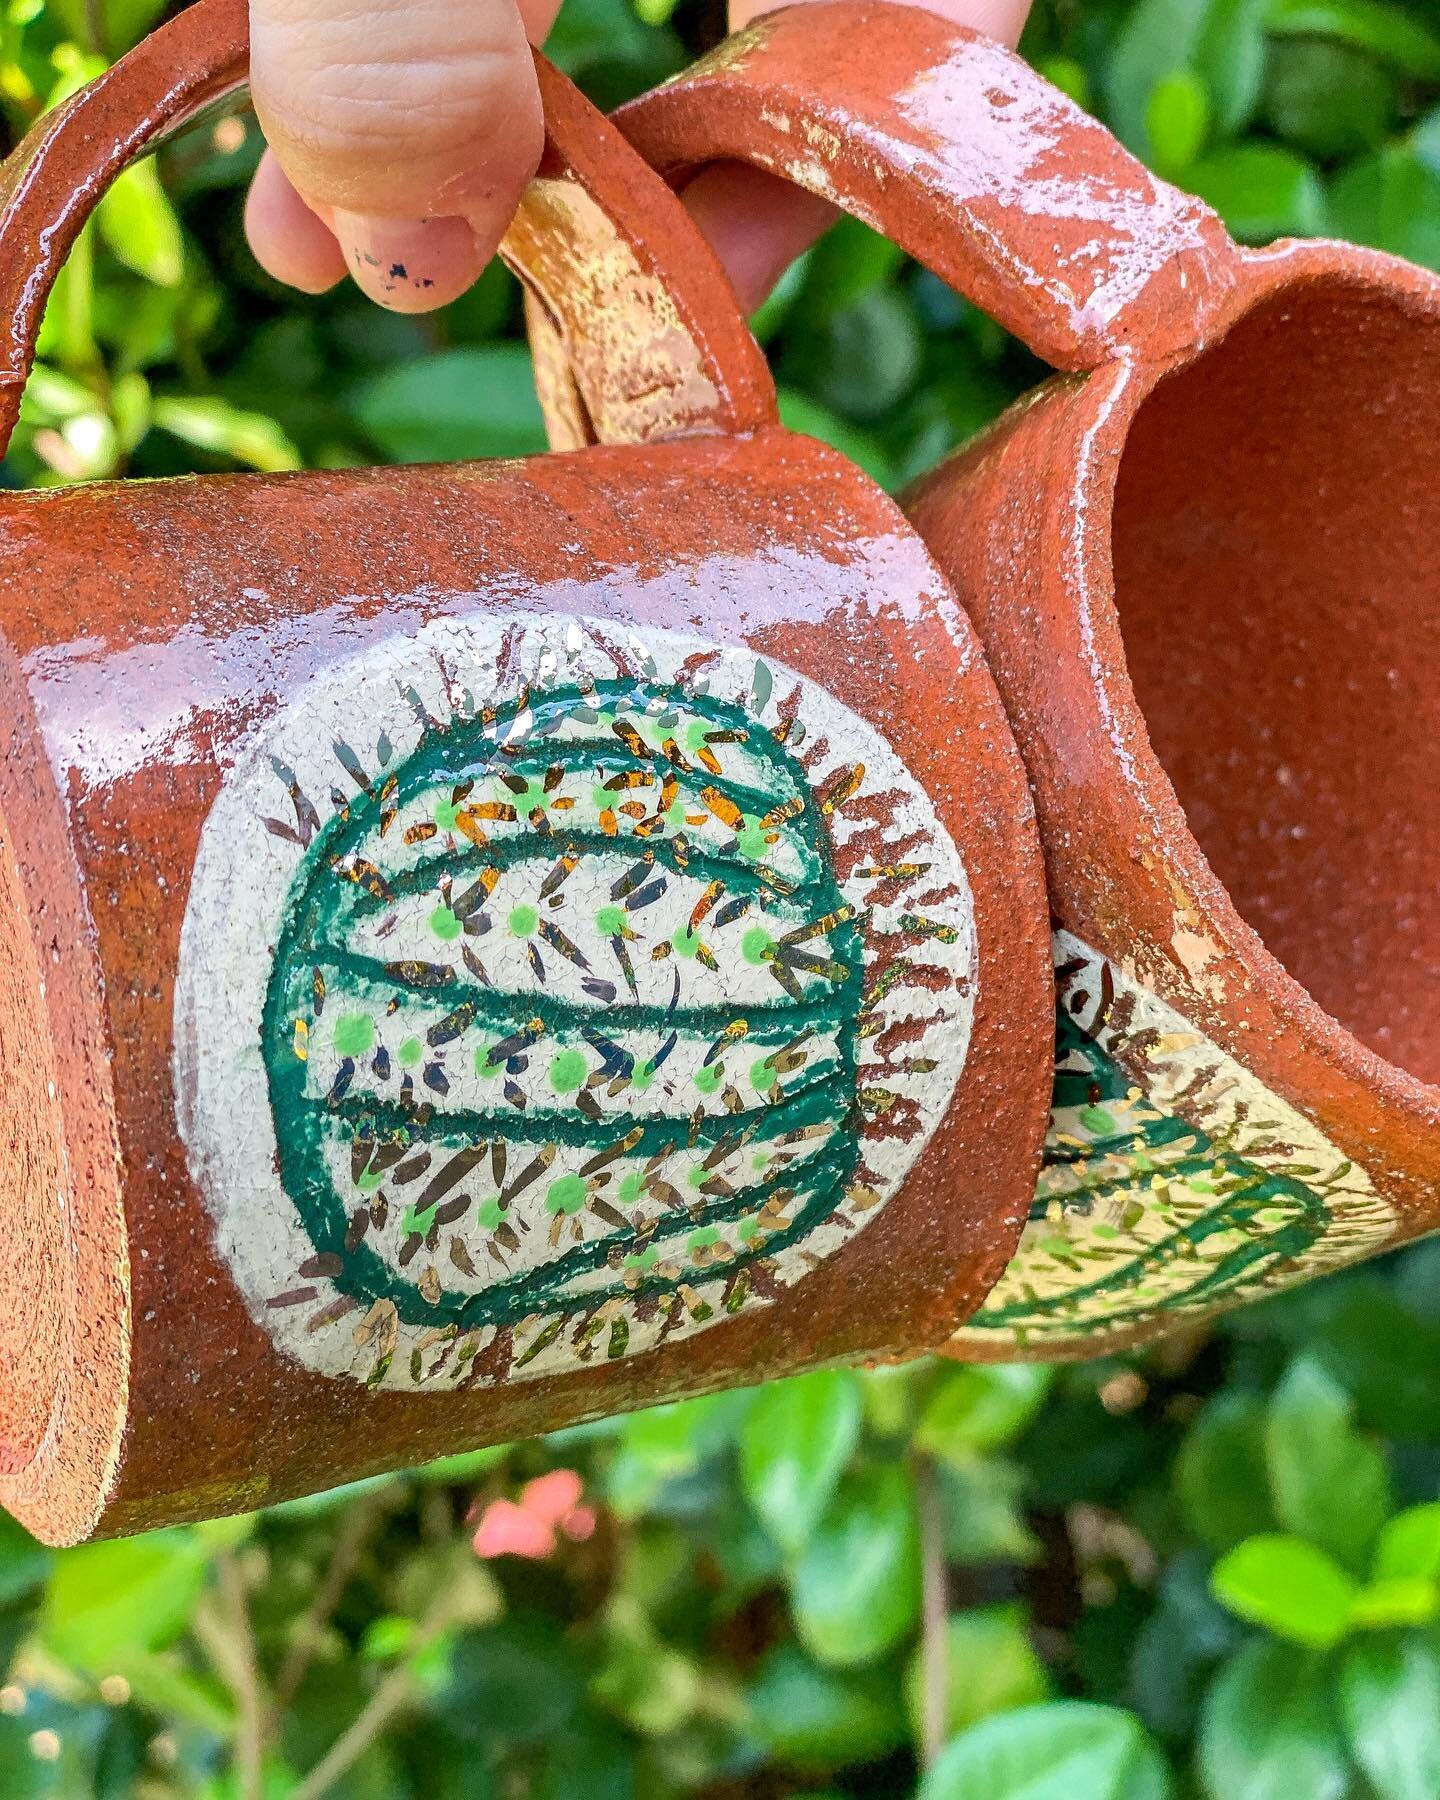 c a c t i 🌵
obsessed with this custom commission for a couple getting married!!
.
.
.
#clay #clayallday #cacti #cactiofinstagram #mug #handmade #thatsdarling #madewithlove #wheelthrownpottery #pottery #victoriajadeart #tallyclayarts #tallahassee #ta